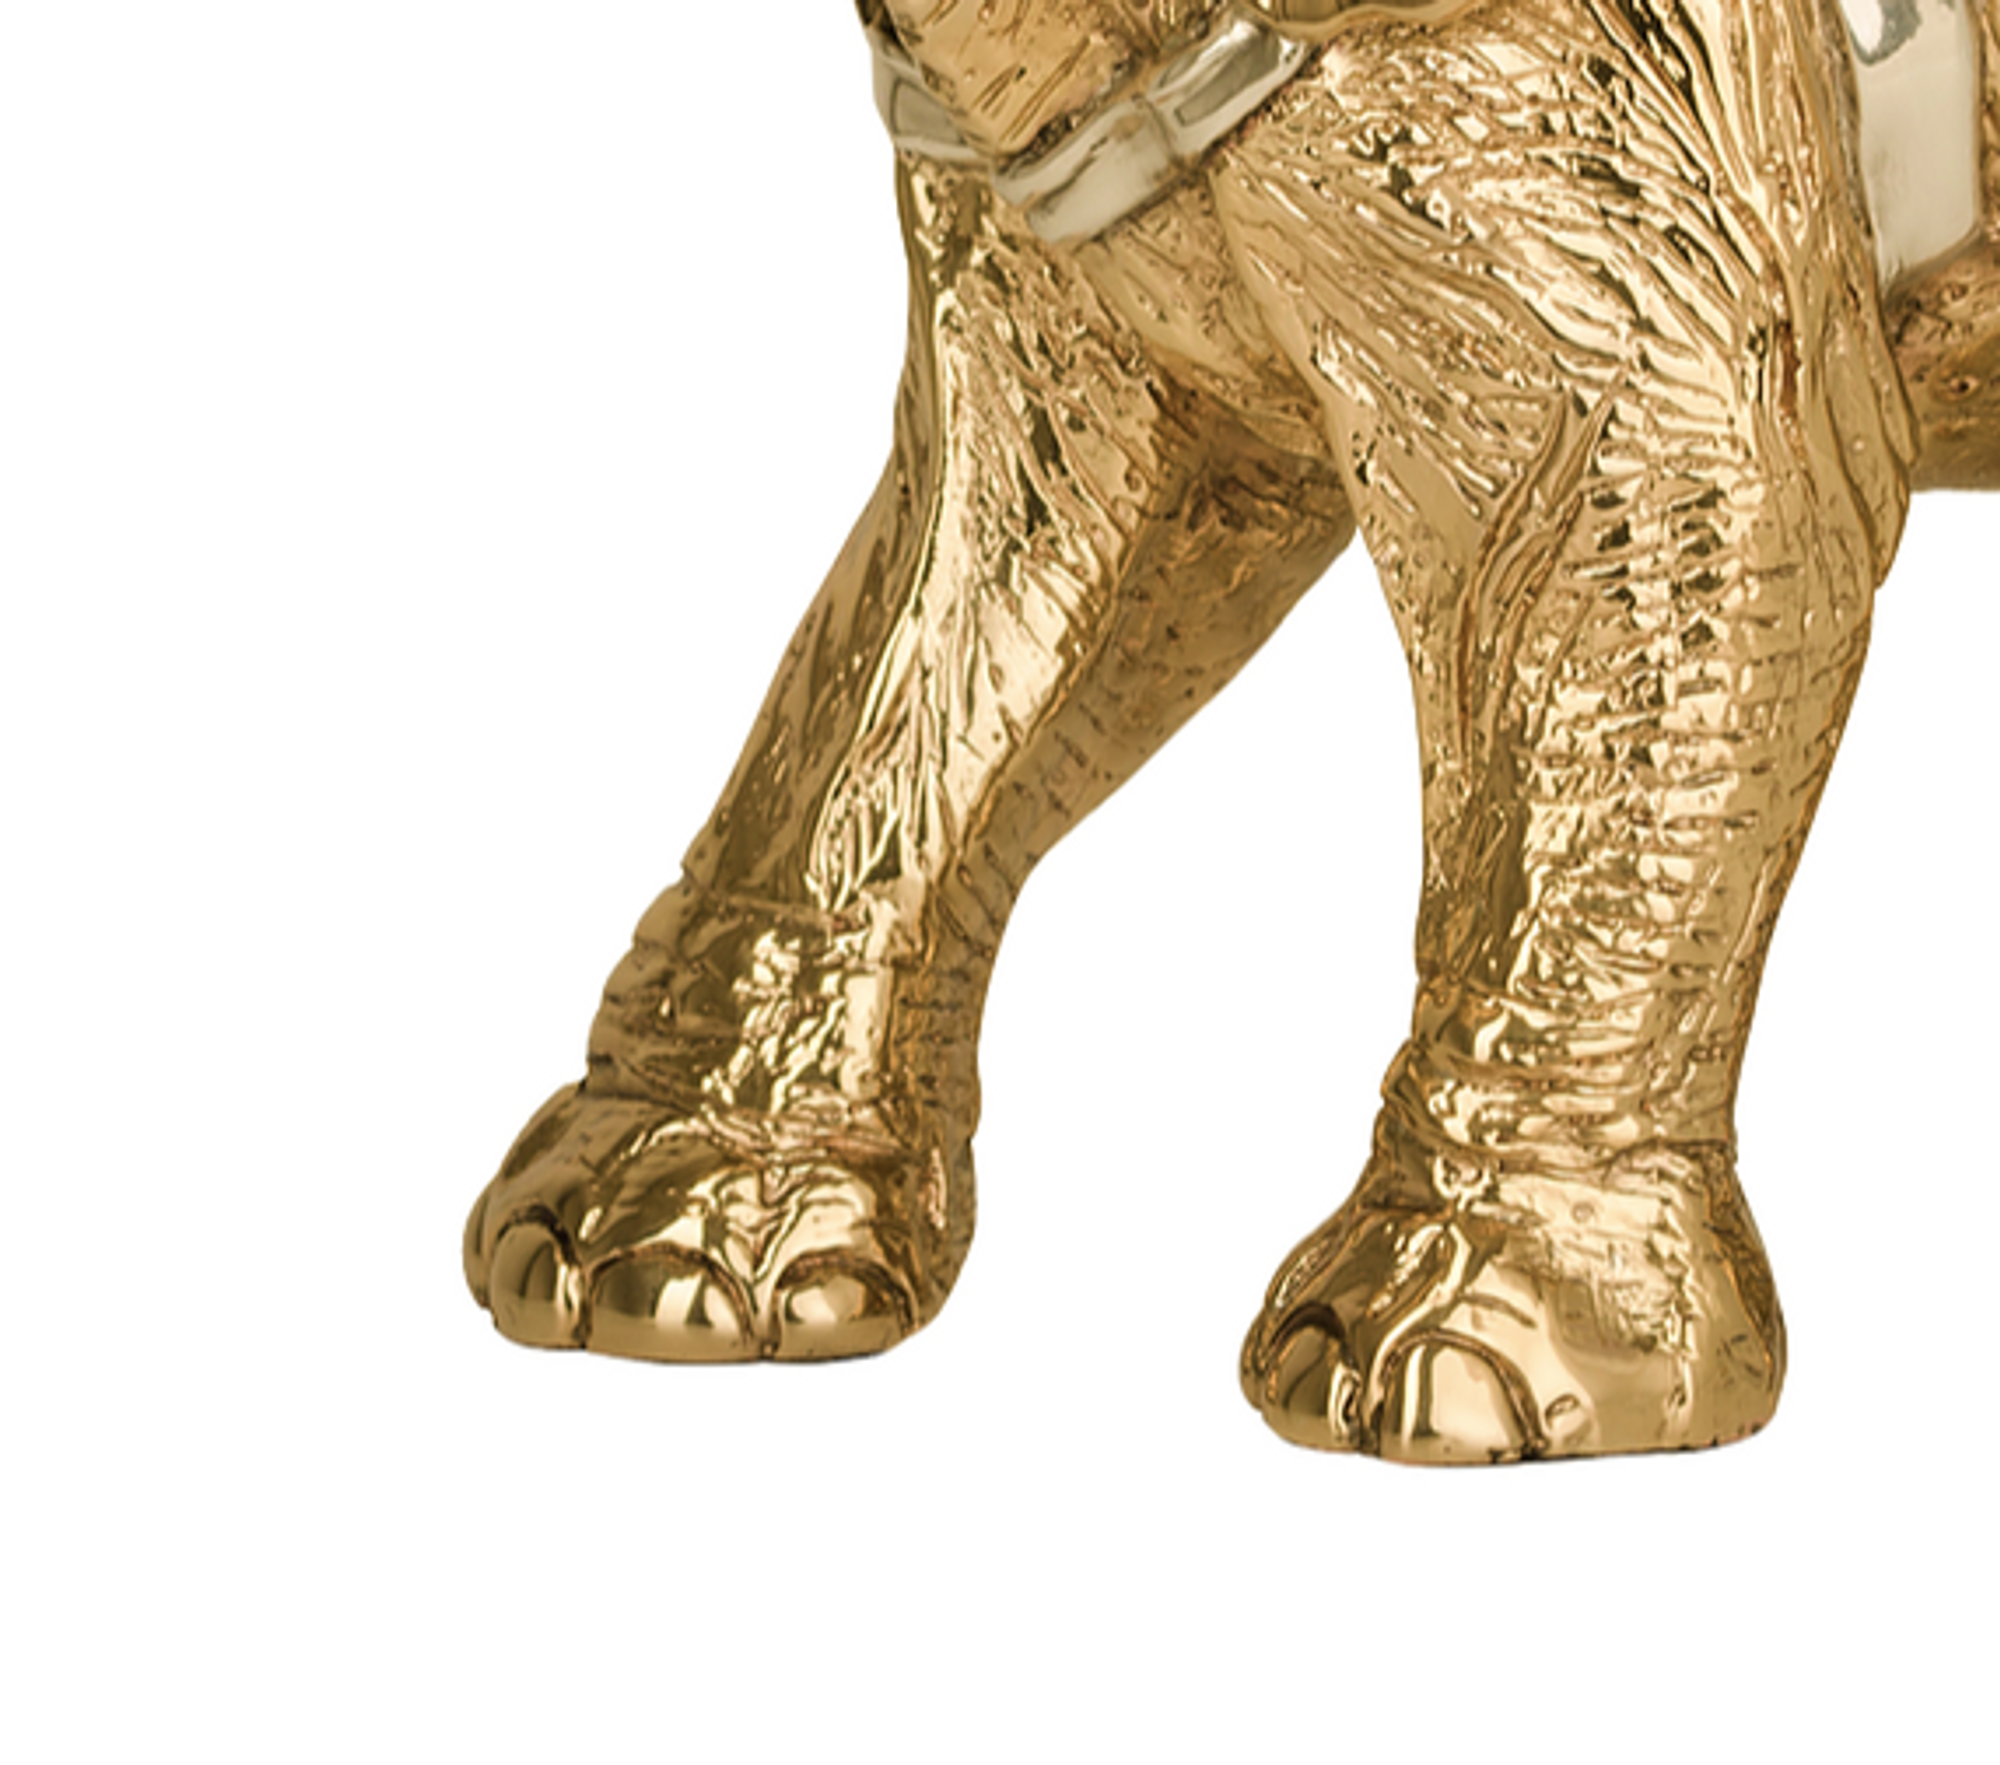 Indian Elephant 24k Gold Plated Sculpture | 7513